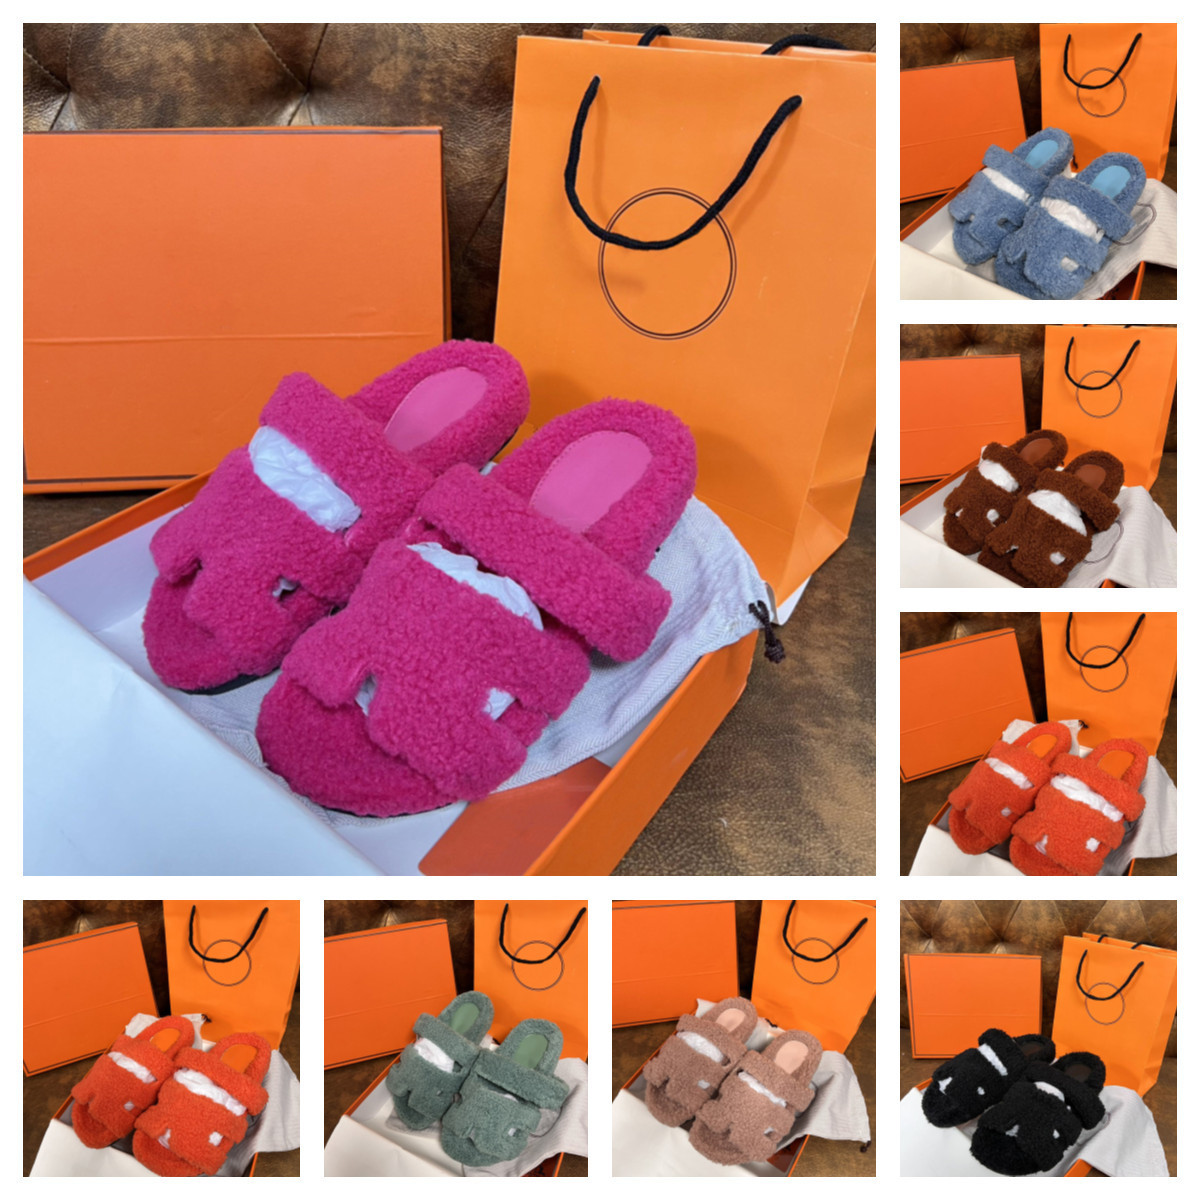 

H letter warm slides slippers sherpa fleee women herme sandals Chypre Wool Sandal womens Winter Soft Fur Furry home indoor Sandal Comfortable Fuzzy shoes, Other color;contact me